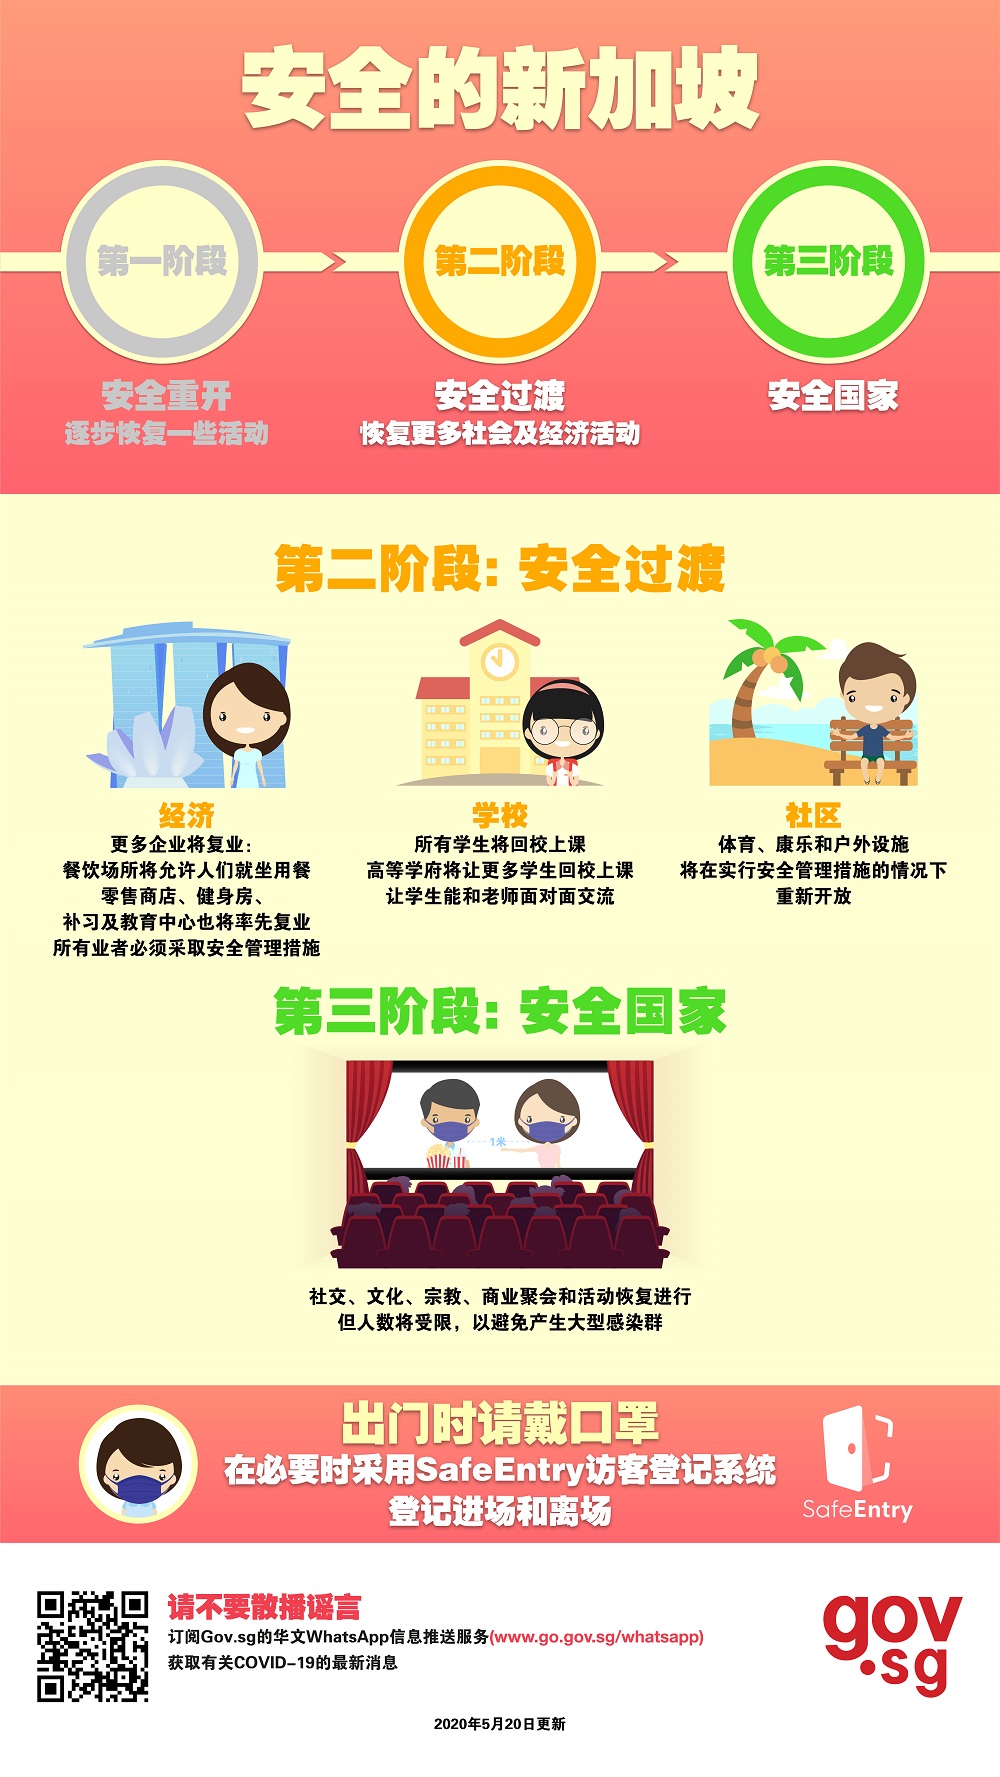 A Safe Singapore in 3 Phases (Phase 2 and 3) - Chinese